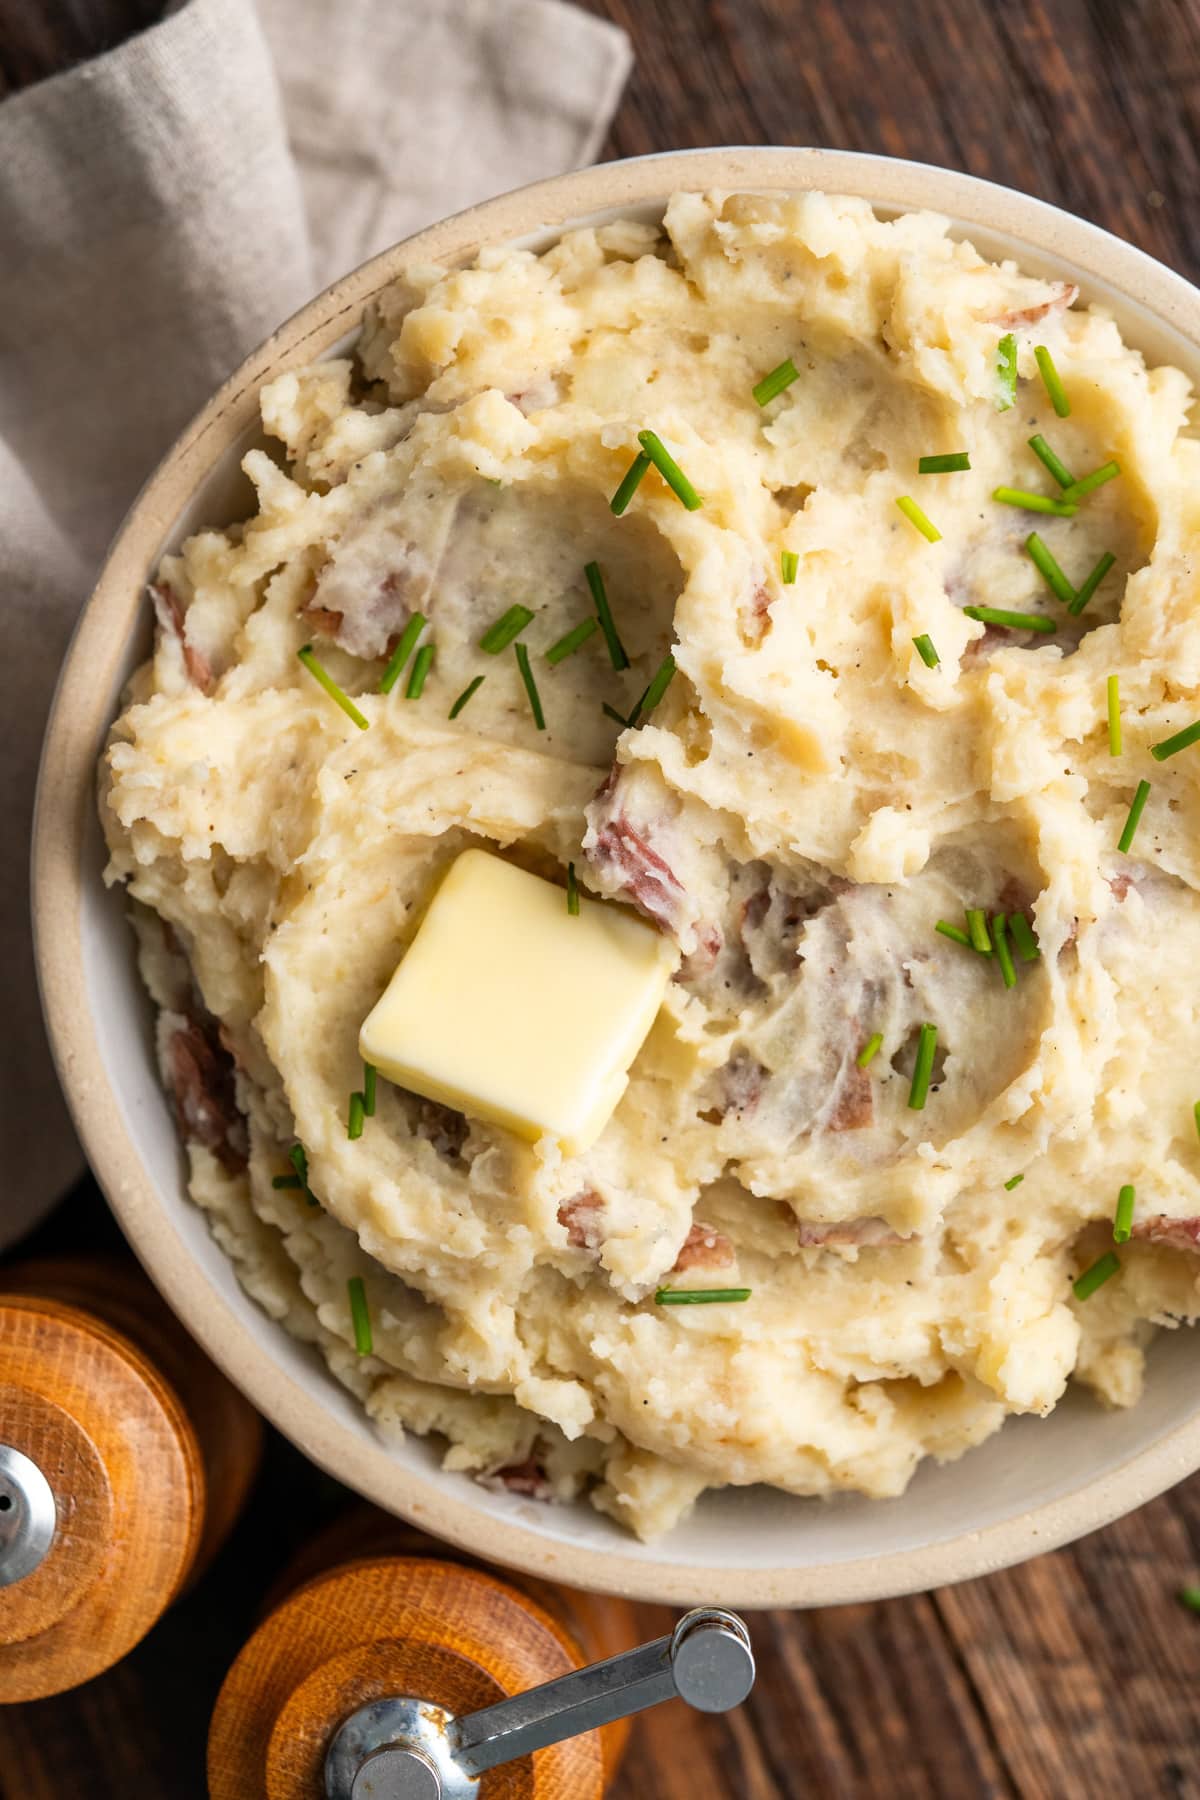 Mashed potatoes with skin in a serving bowl.